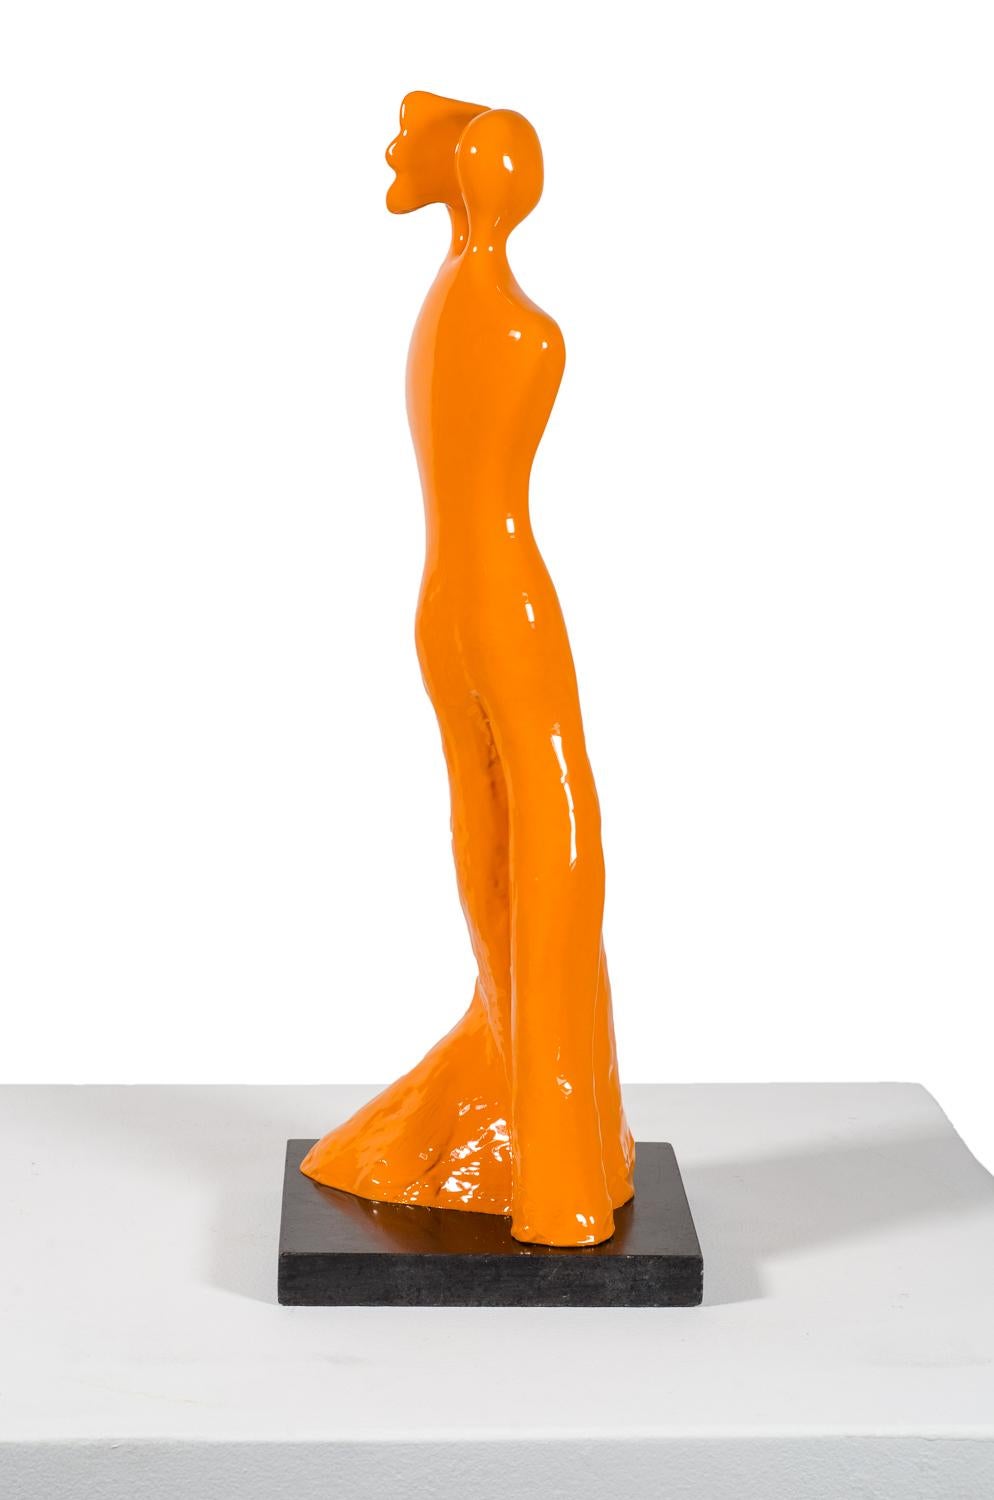 Soul Mates #1 (in orange) When in love their souls and bodies fuse into just one - Abstract Sculpture by Beatriz Gerenstein